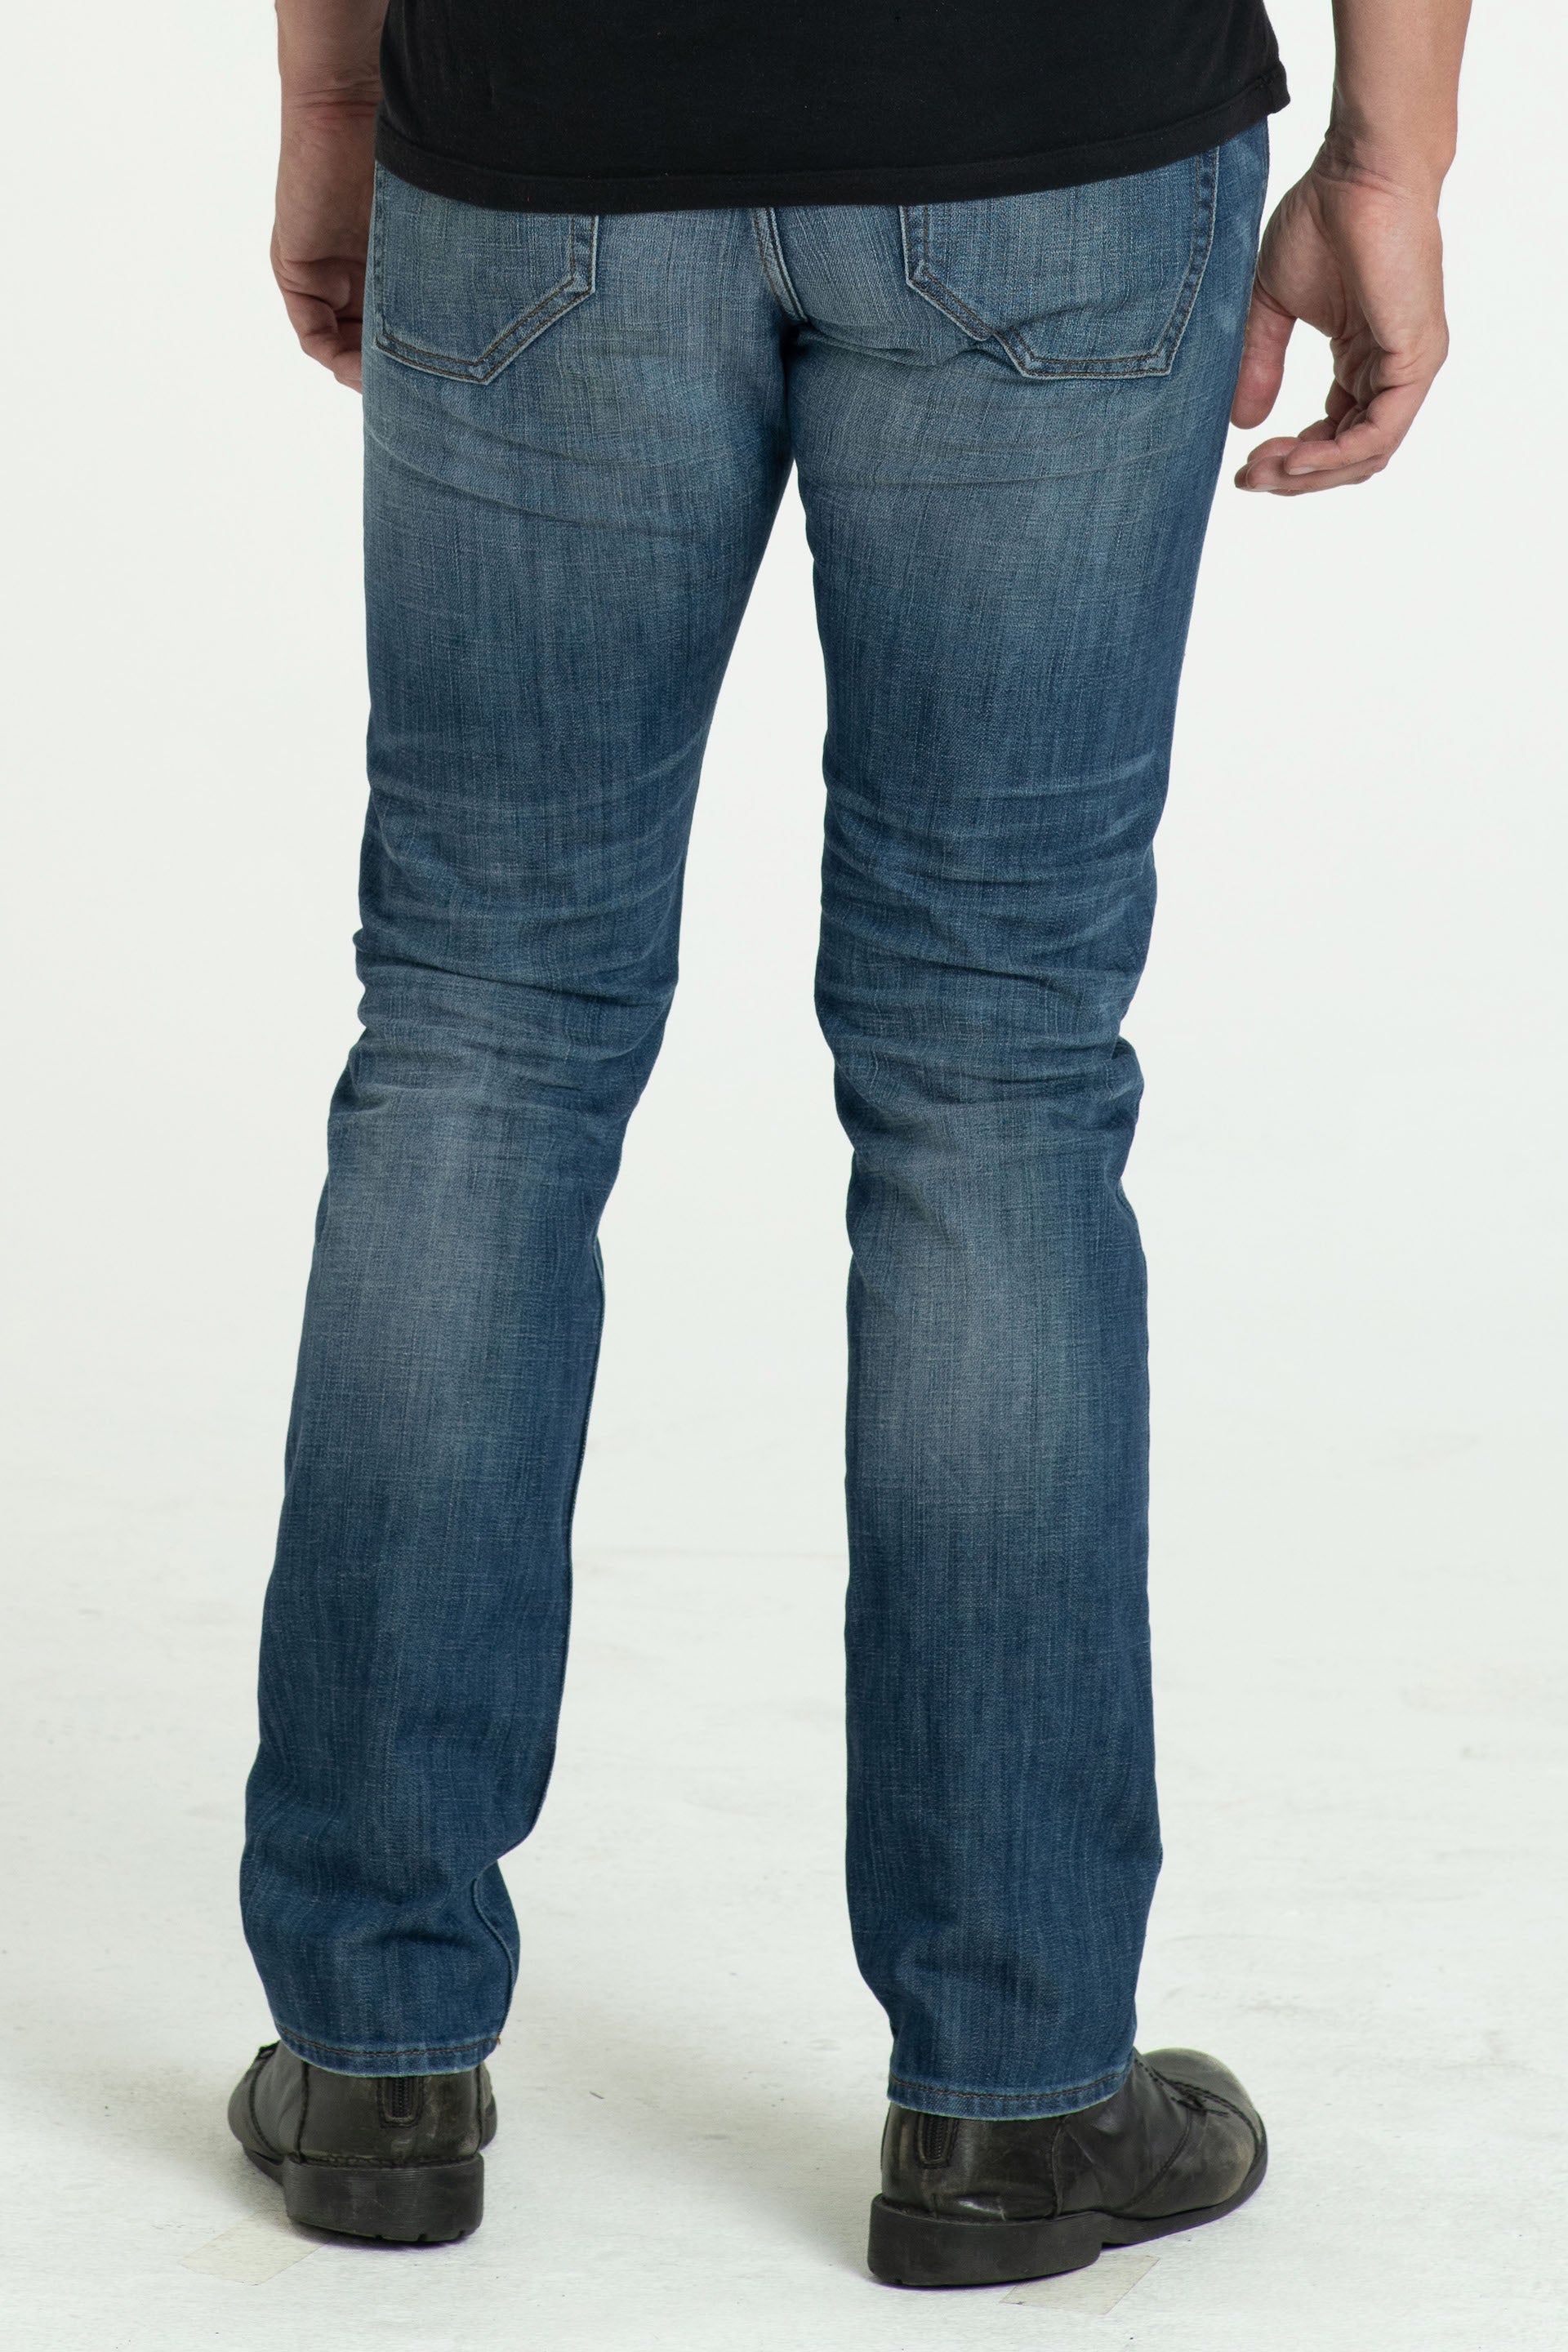 BARFLY SLIM DENIM PANTS IN WASTED BLUES